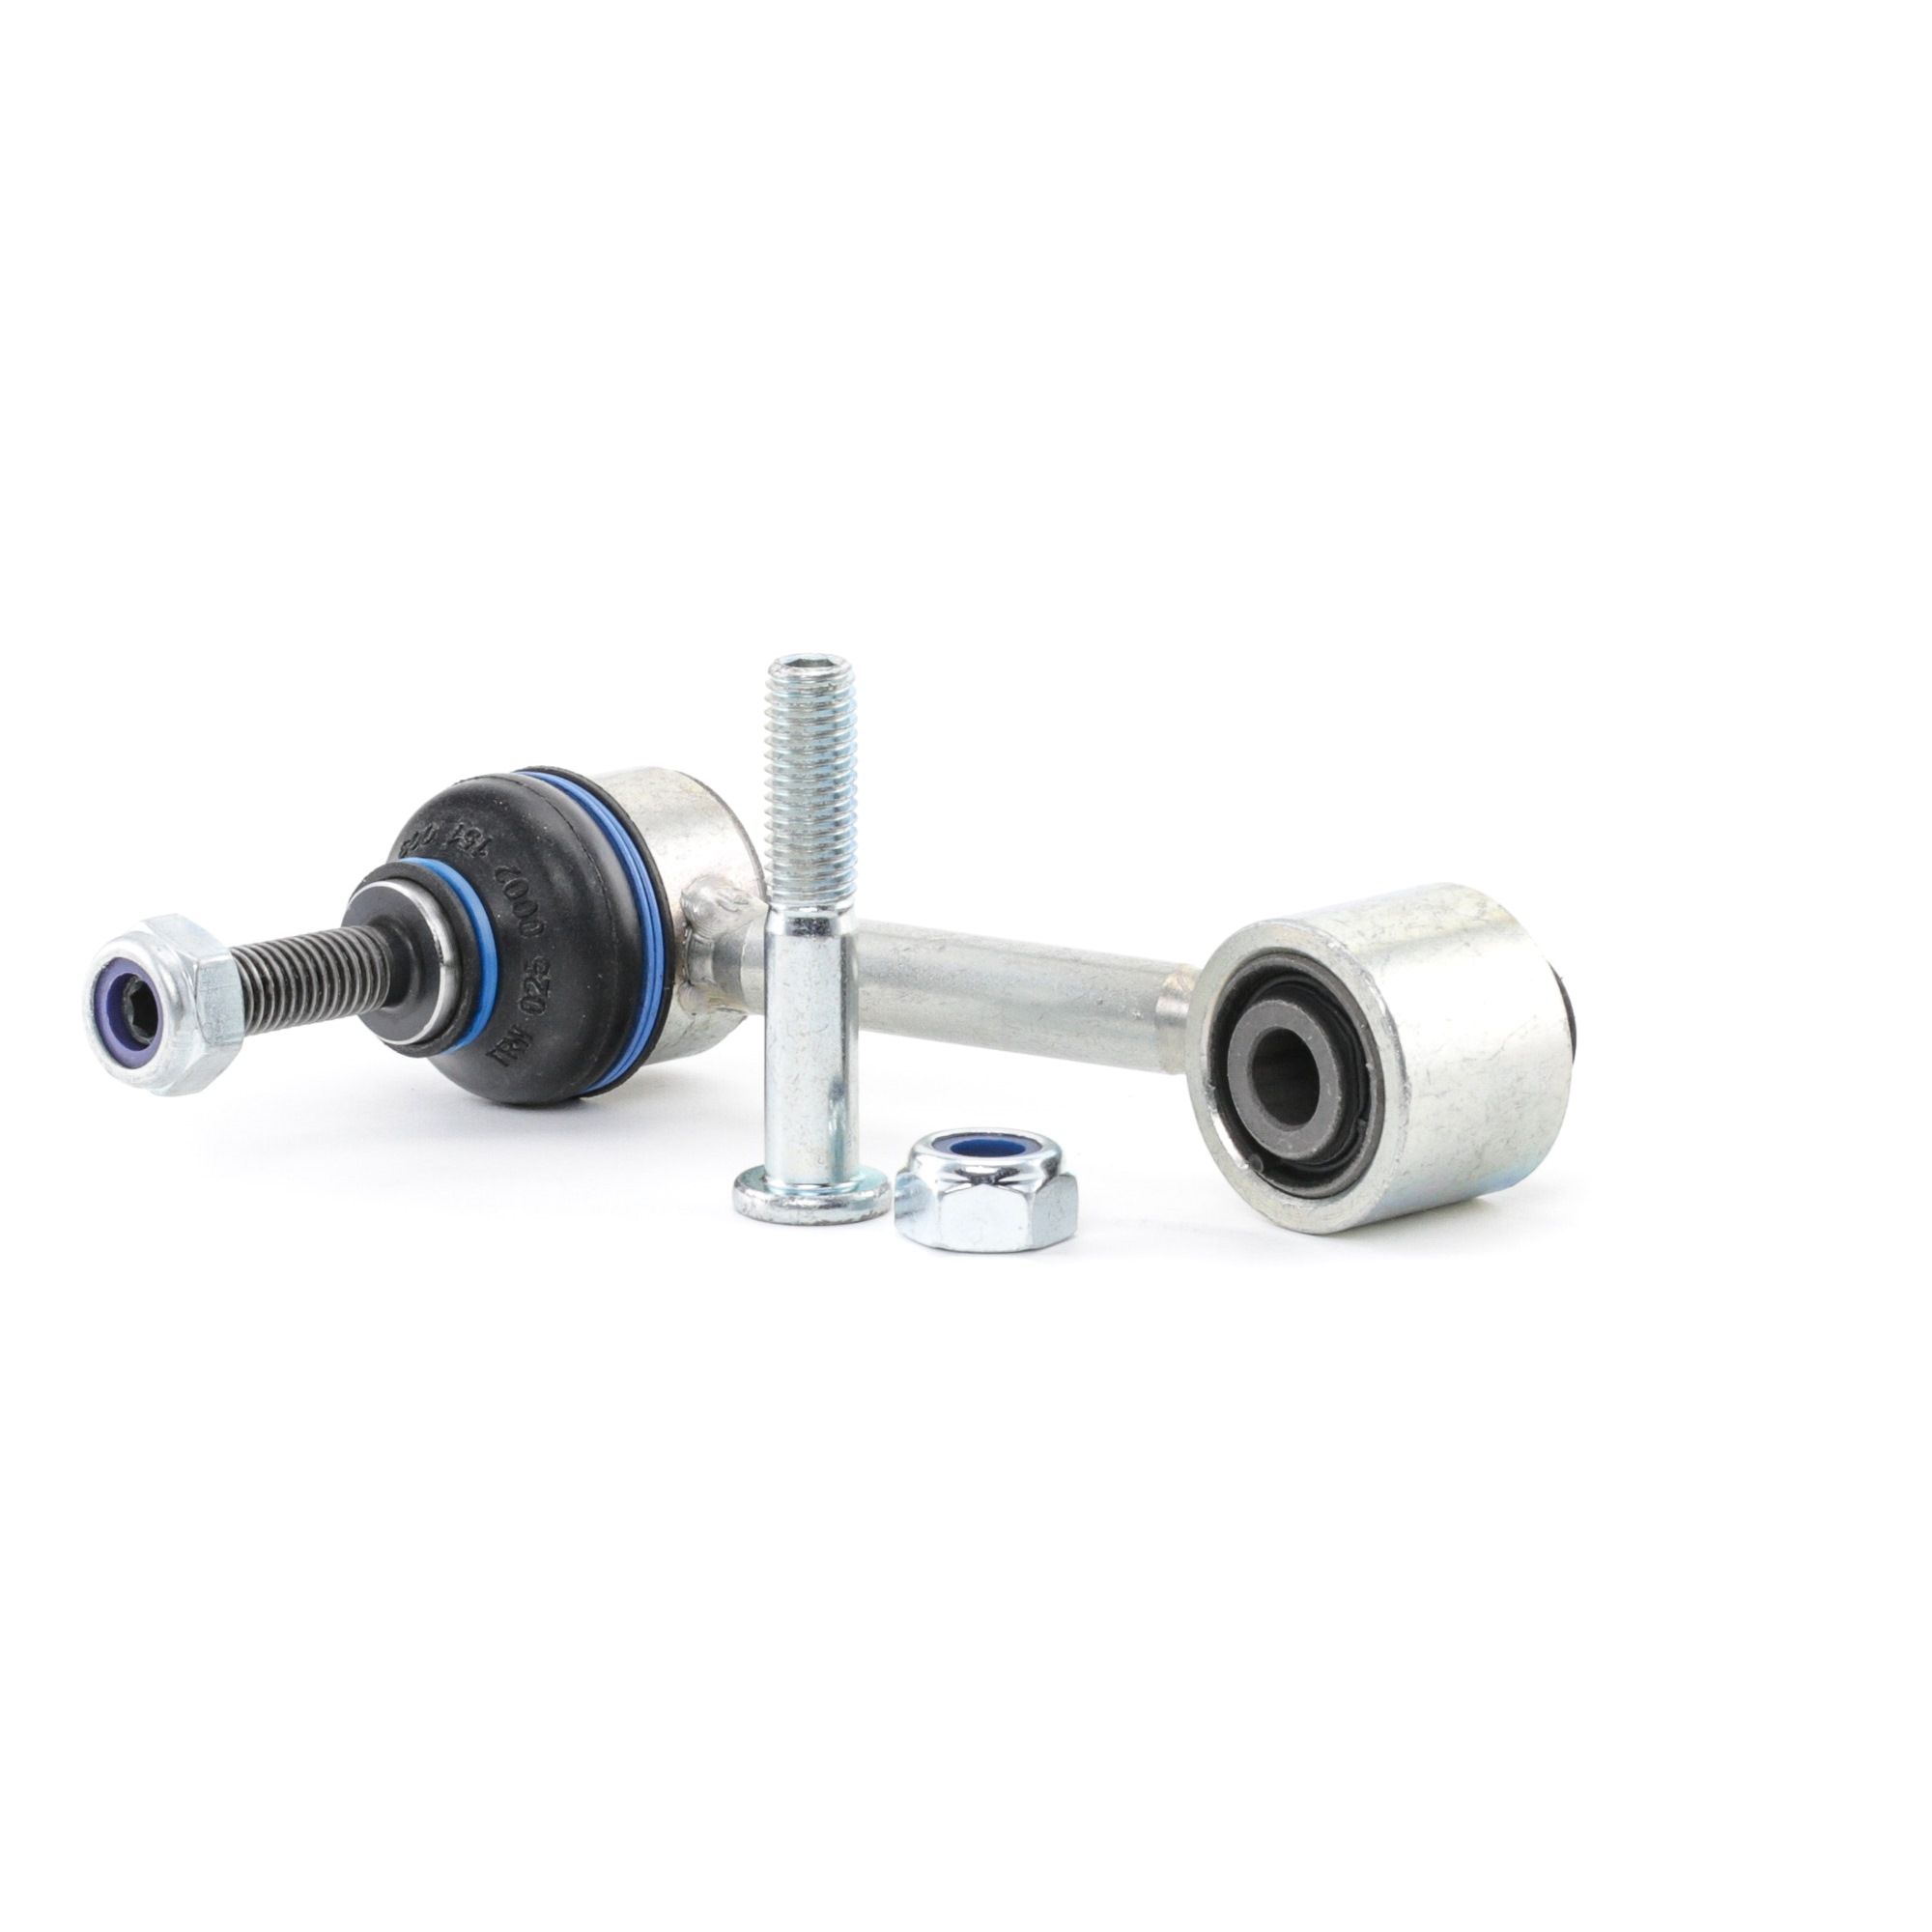 TRW 95mm, M10x1.5 , with accessories Length: 95mm Drop link JTS484 buy